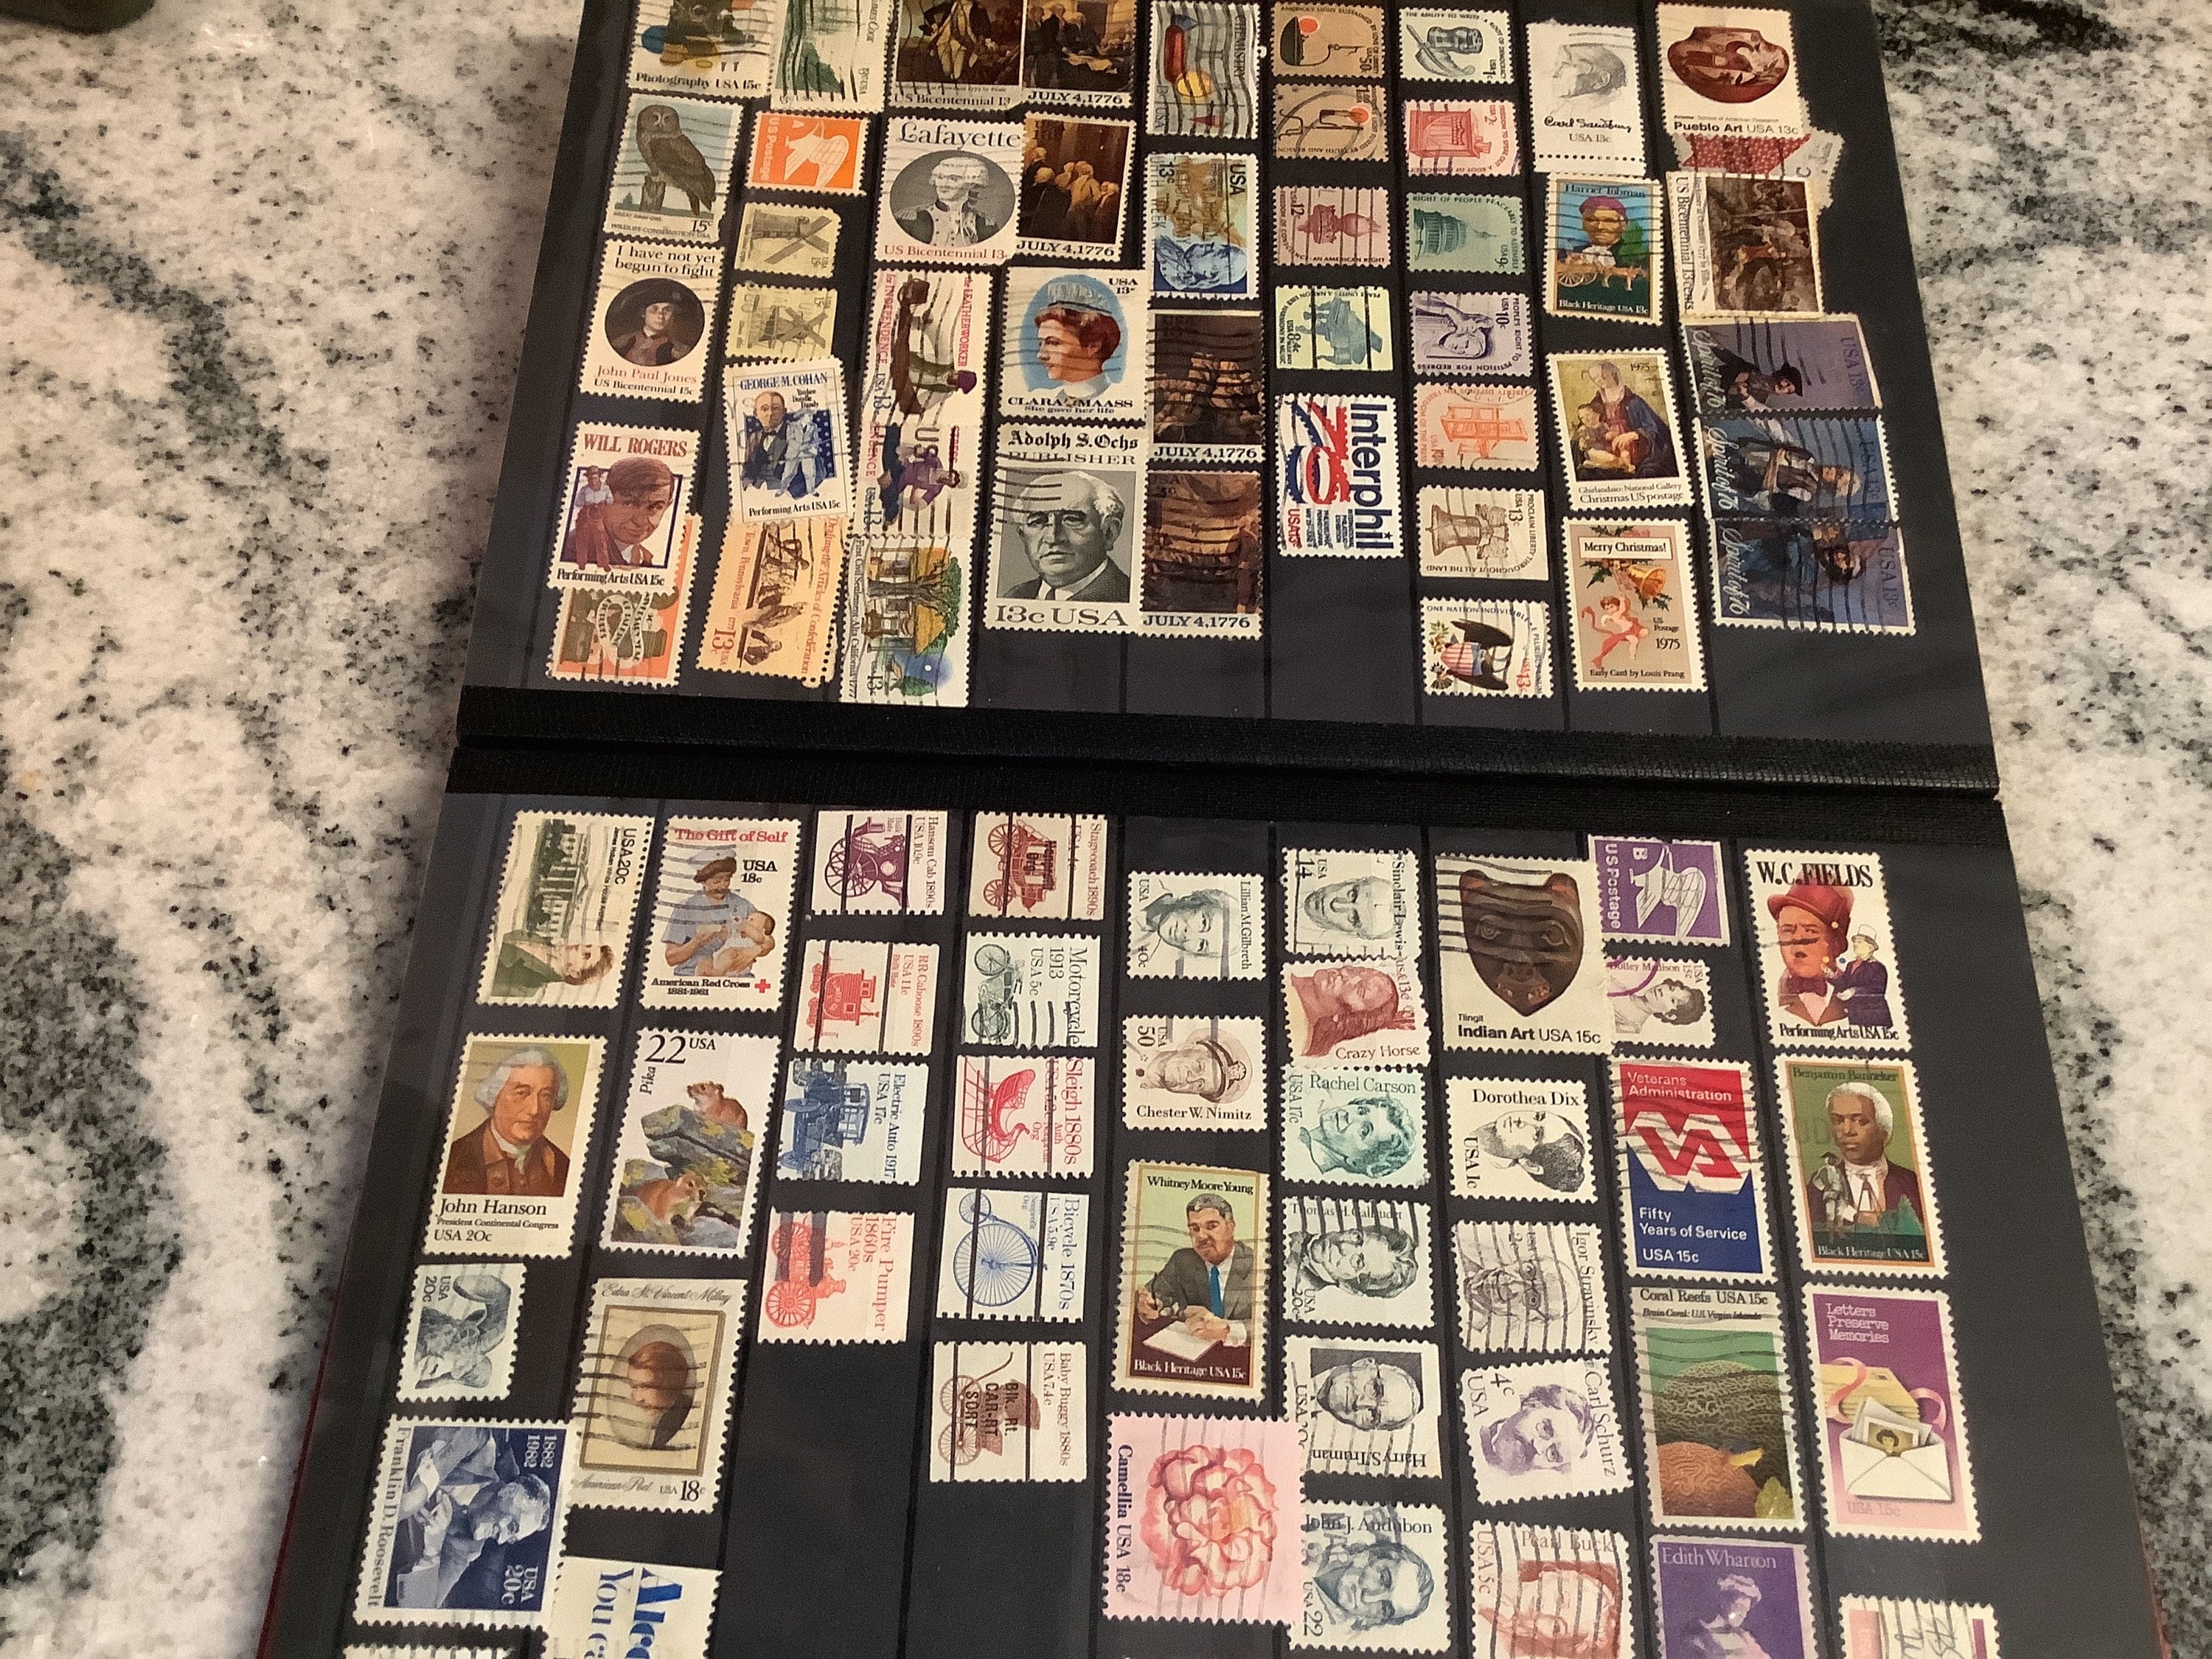 USPS 1993 Commemorative Stamp Collection Book 